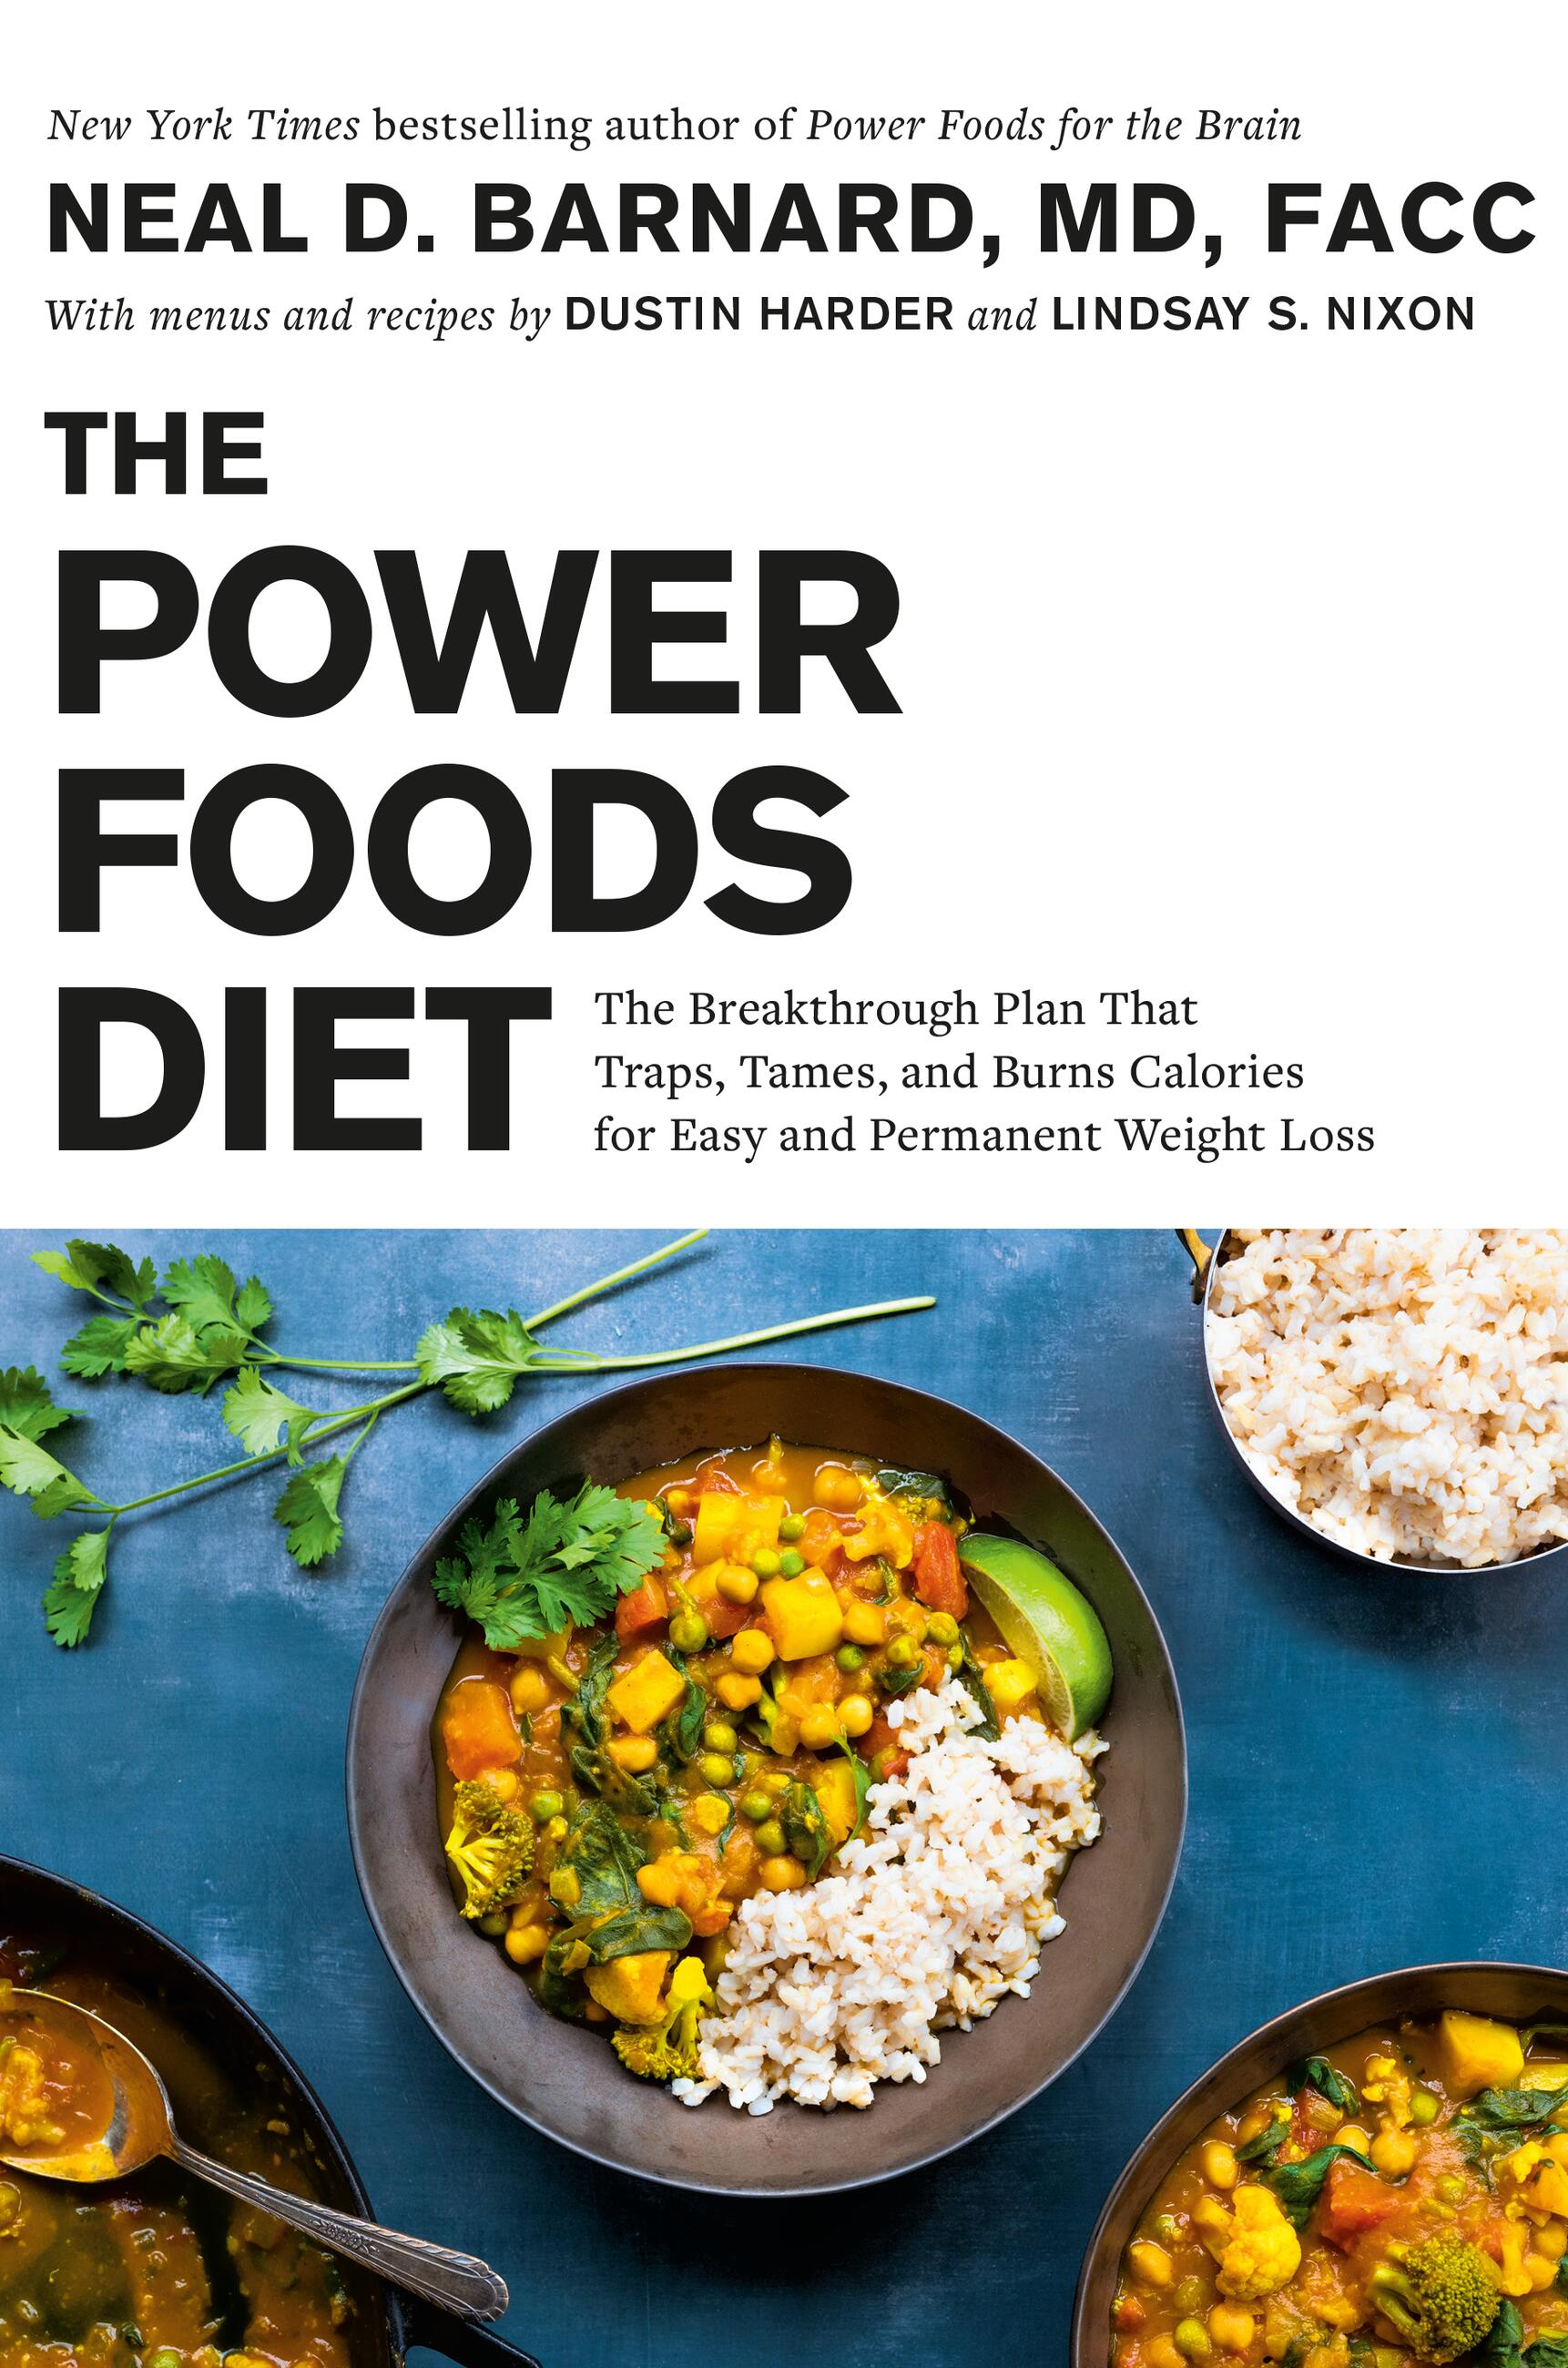 Which Type of Food Has the Highest Calorie Value? Discover the Power Foods.